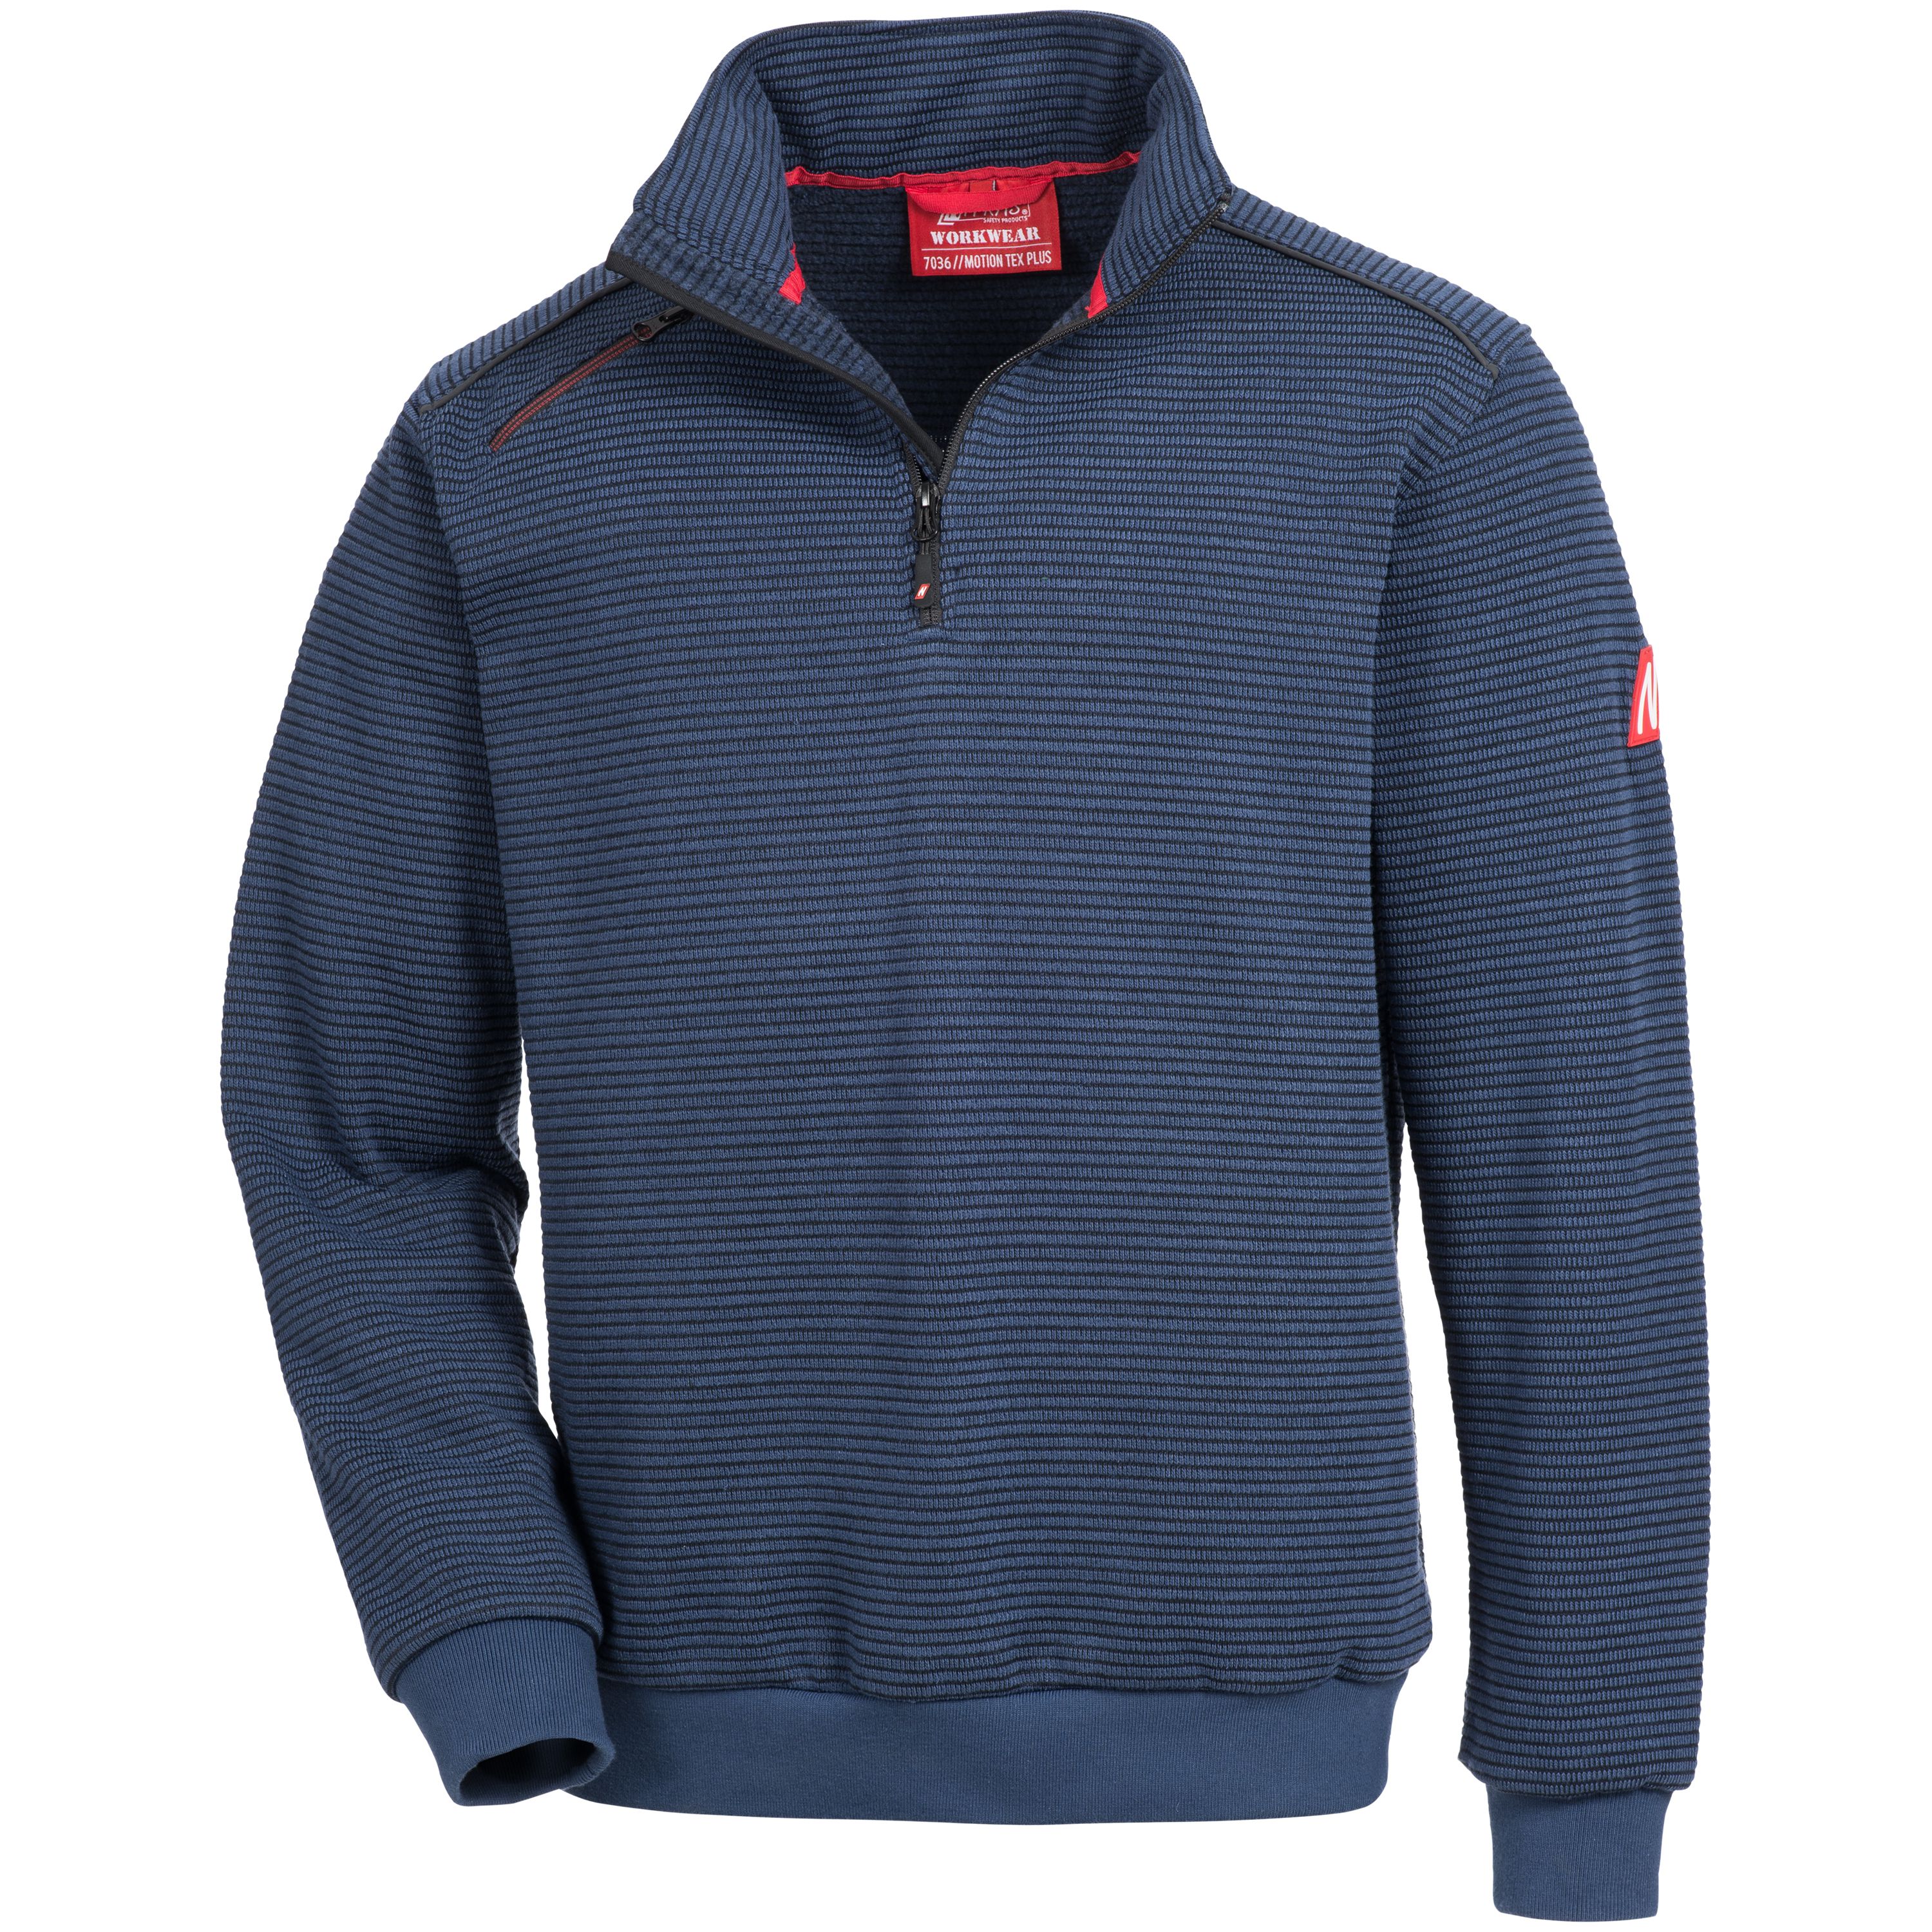 NITRAS MOTION TEX PLUS 7036 Pullover - Warming knitted jacket for work - Dark blue - XS